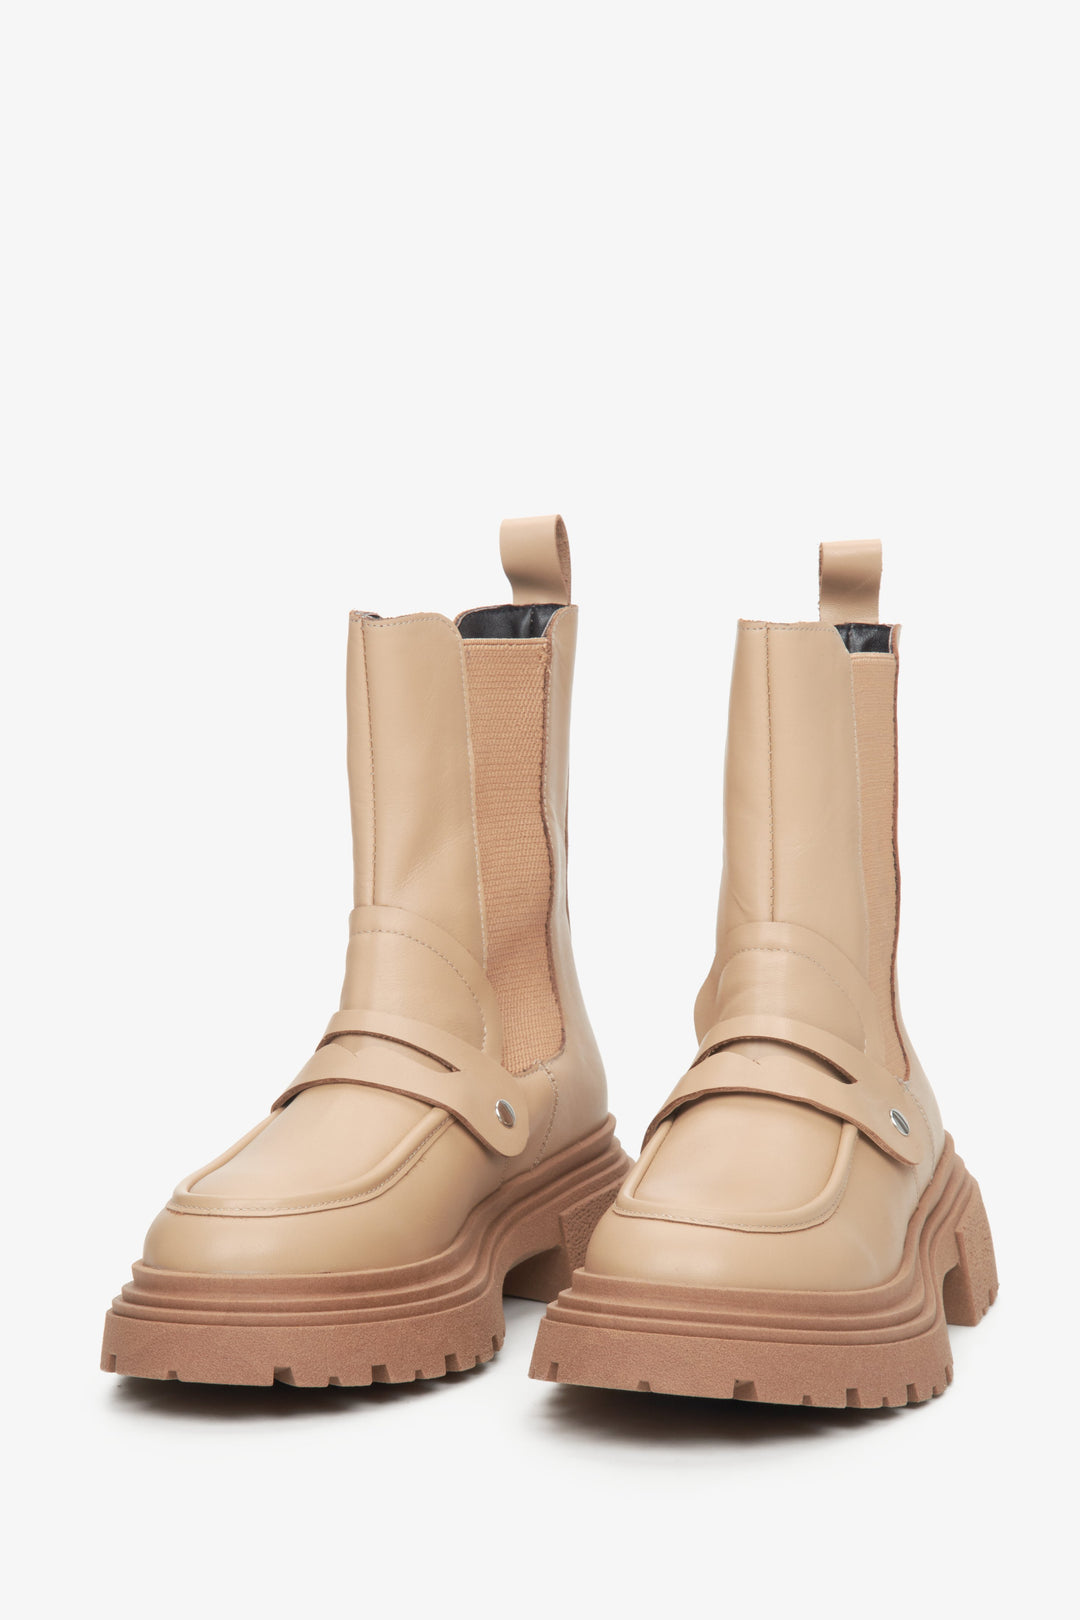 Women's beige leather Chelsea boots by Estro - close-up on the front of the model.